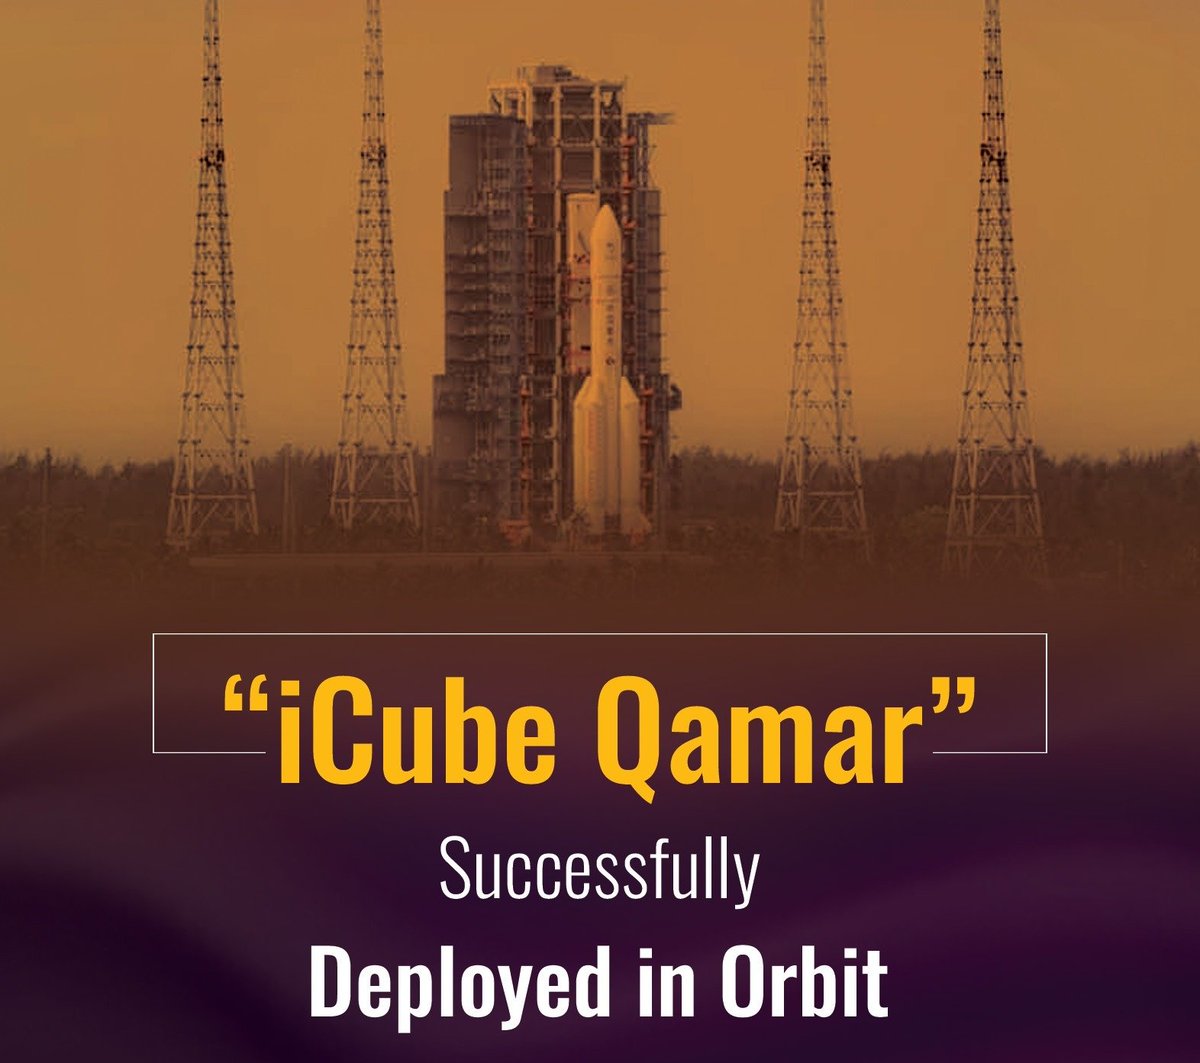 Pakistan’s first lunar mission, iCube Qamar, has been successfully deployed in orbit.